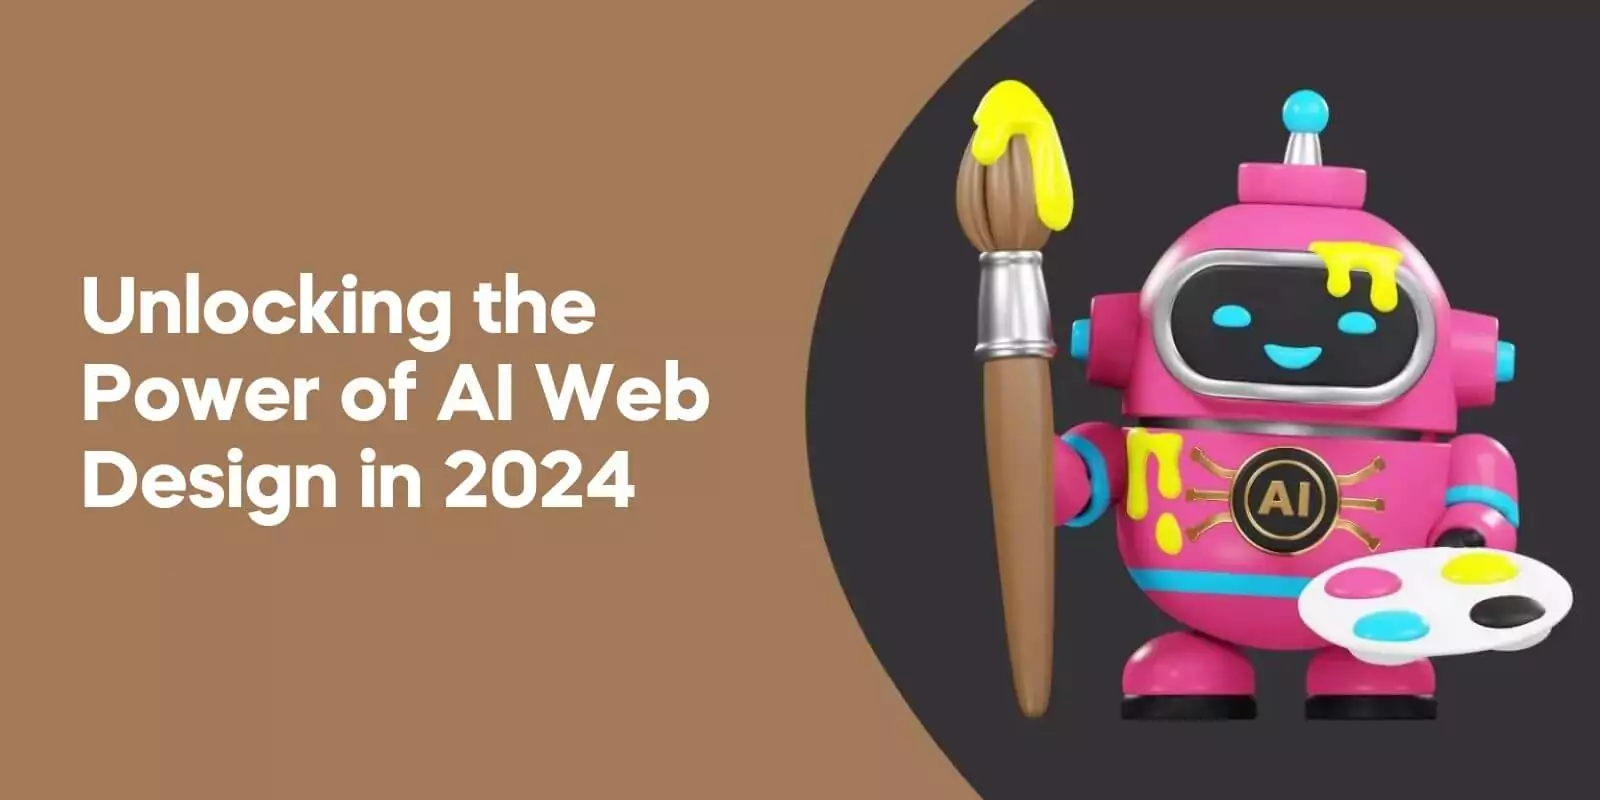 Unlocking the Power of AI Web Design in 2024